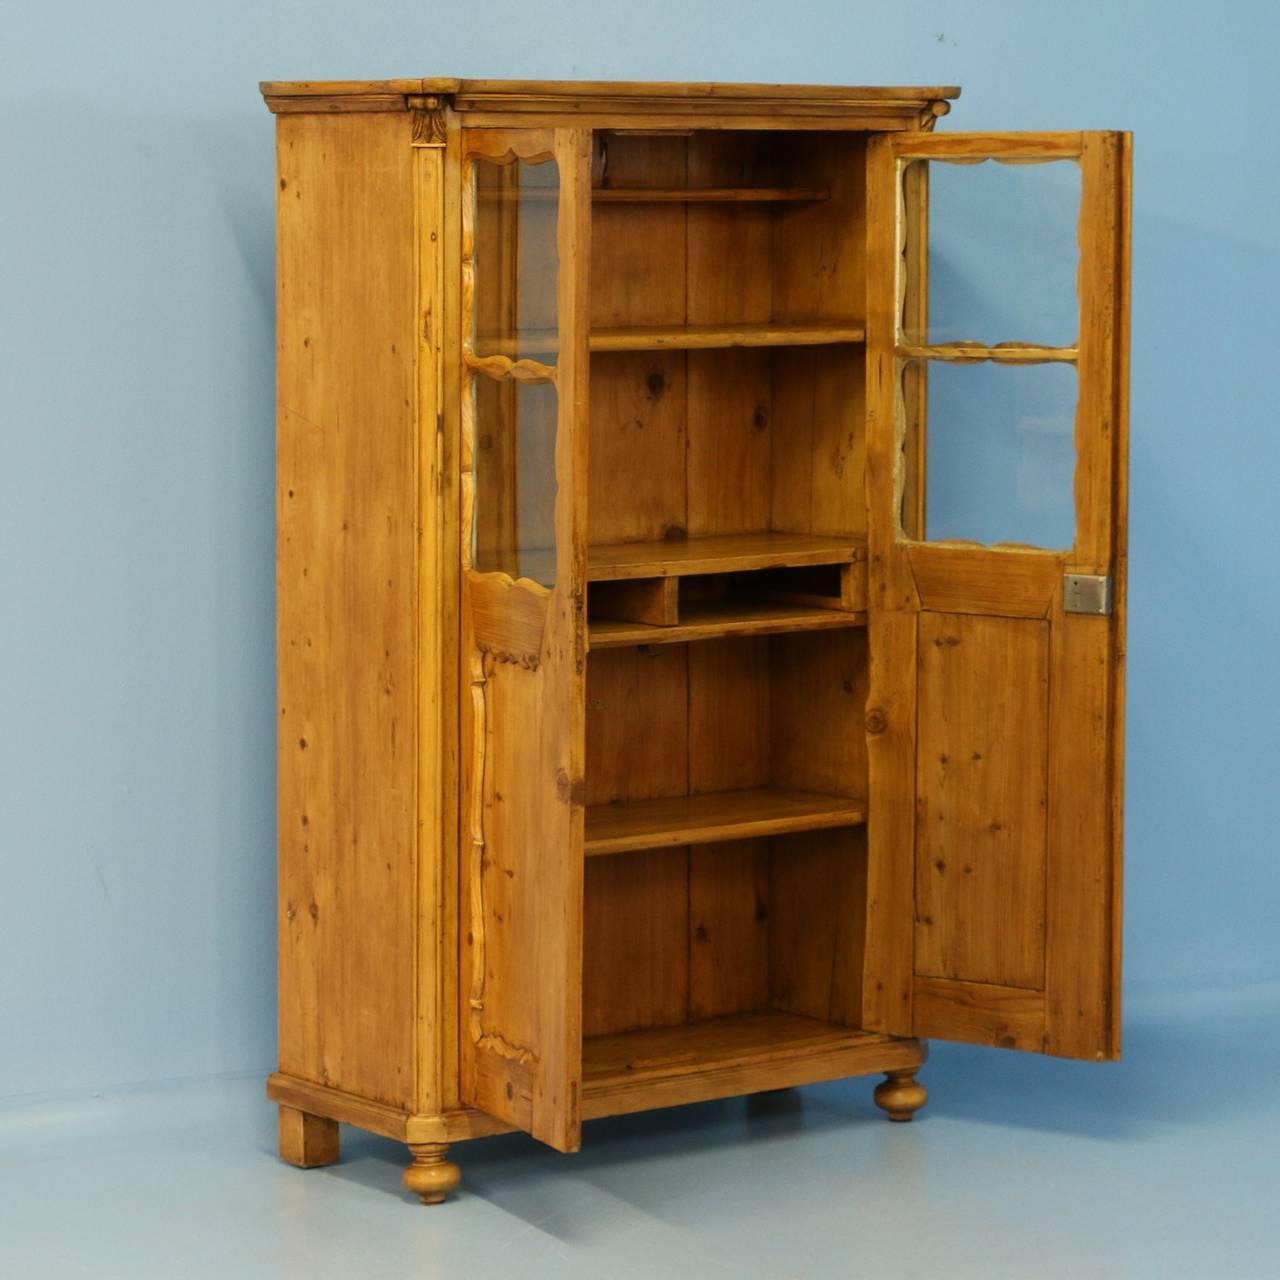 This delightful pine bookcase would have been used in a country home to store household goods and table linens originally as a cabinet. The carved, curved panels and crown add a gentle touch of grace to this sweet piece. The pine has been waxed,